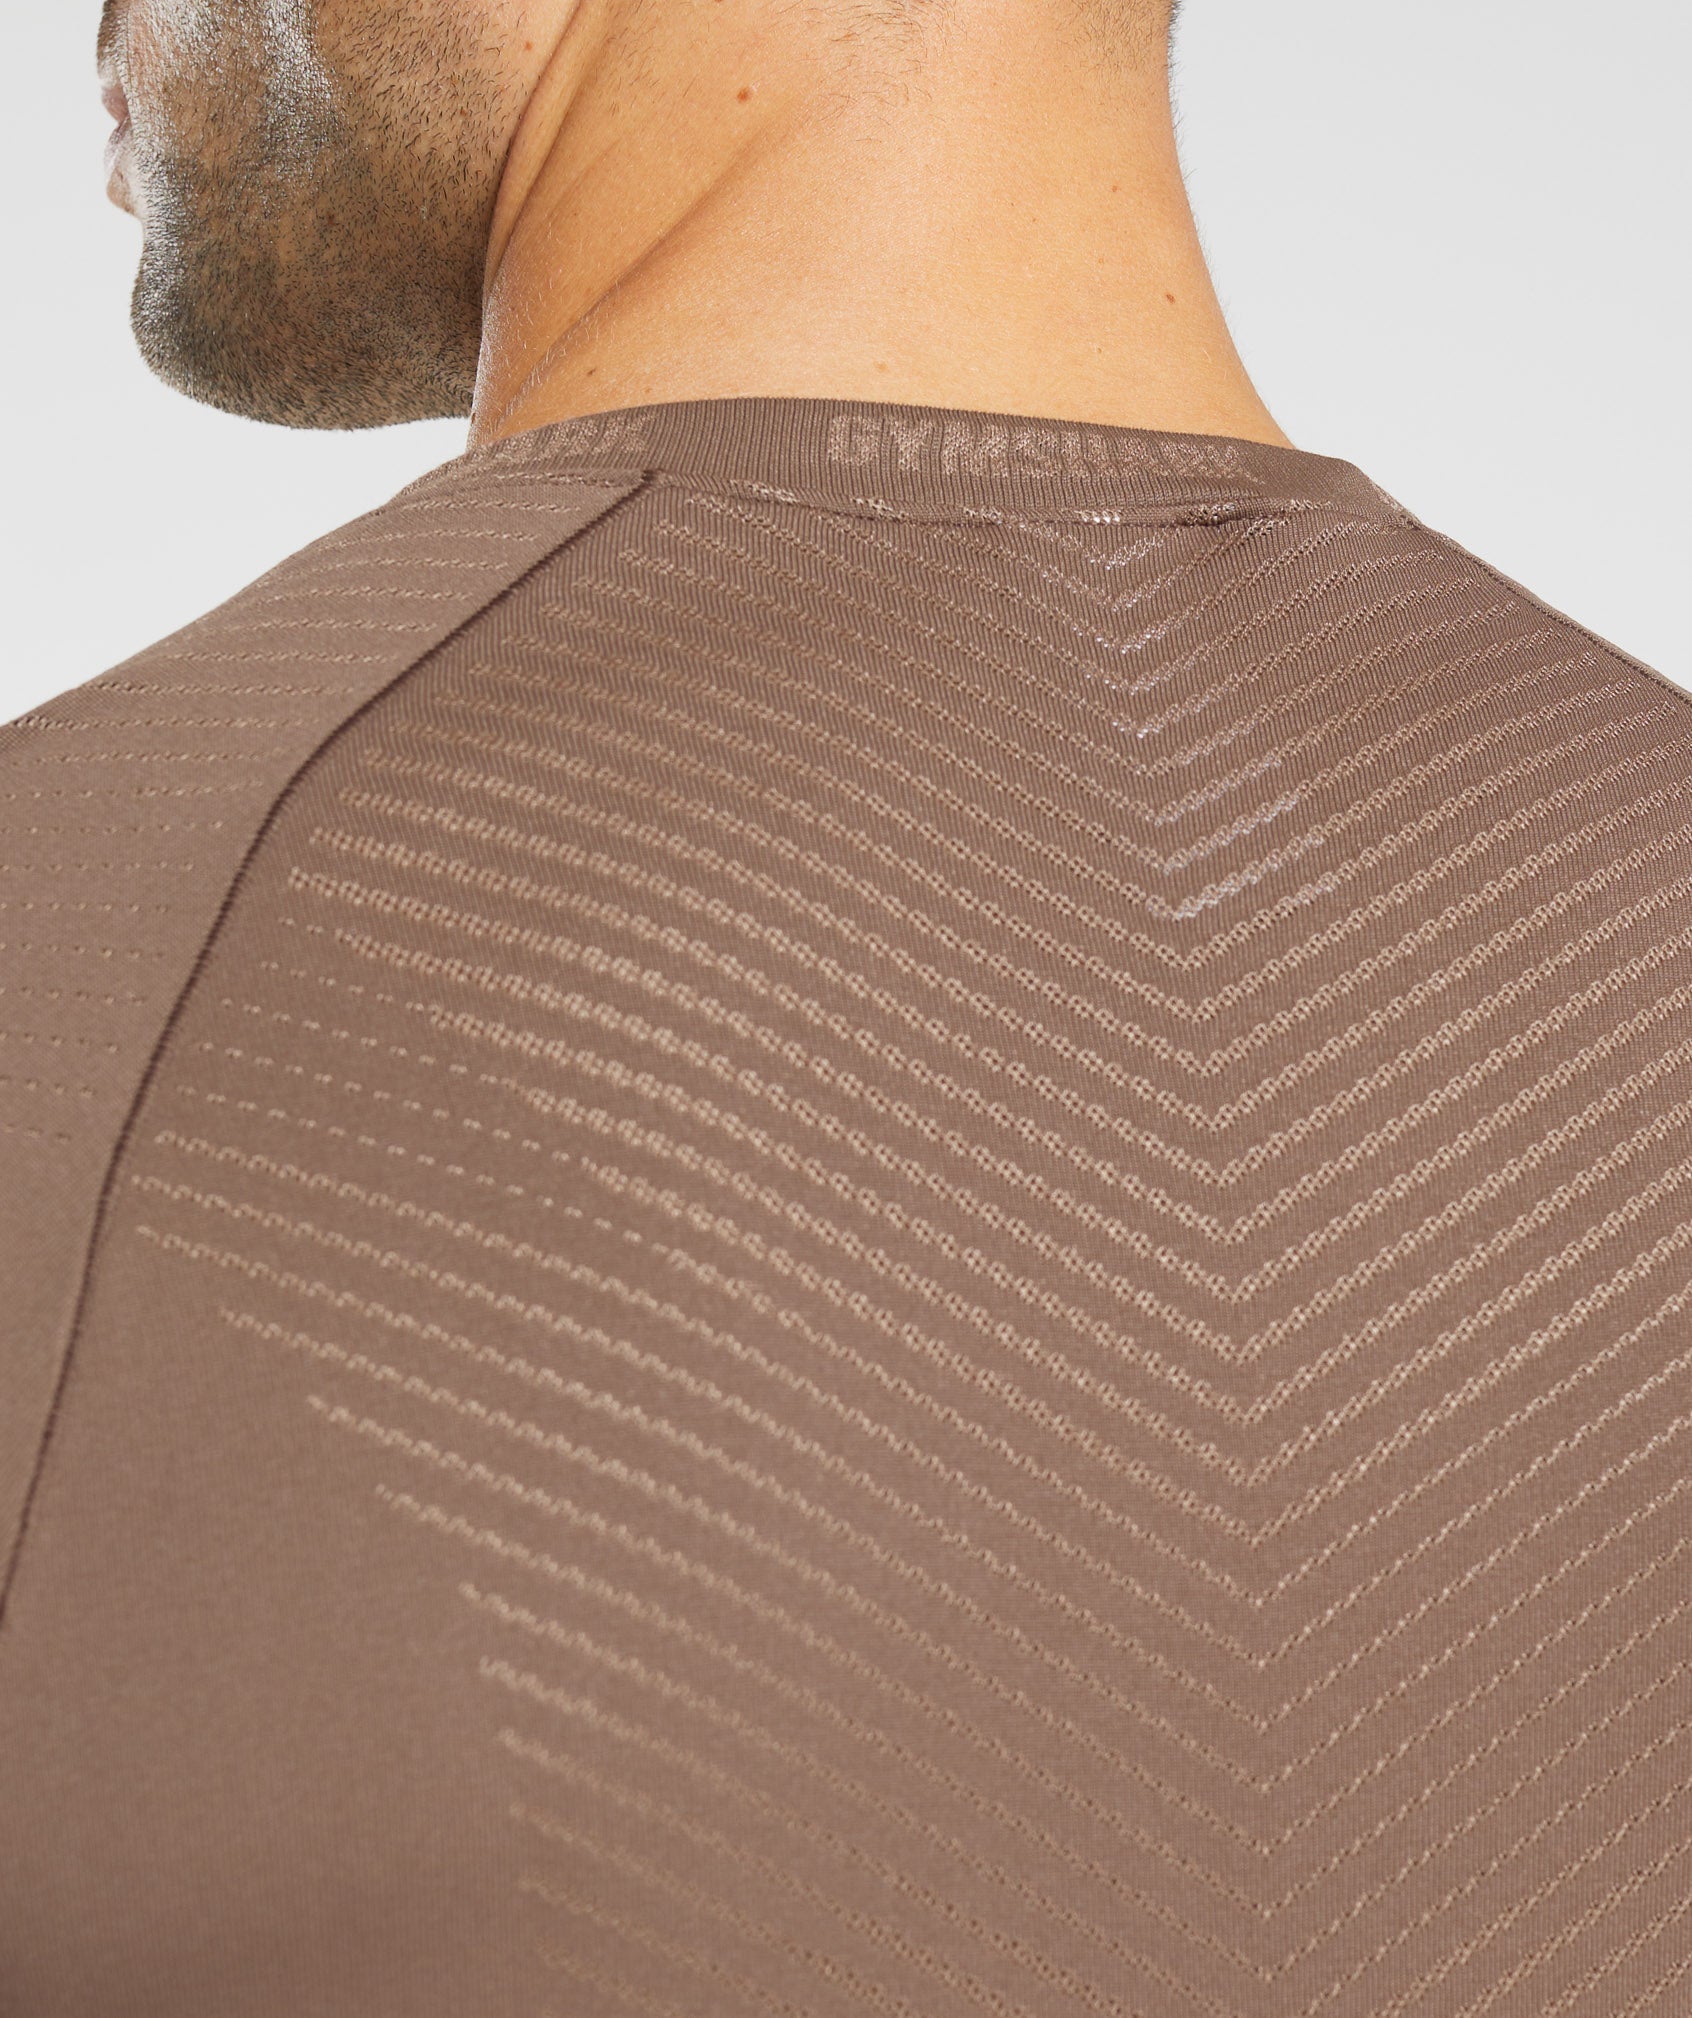 Apex Seamless T-Shirt in Soft Brown/Taupe Brown - view 5